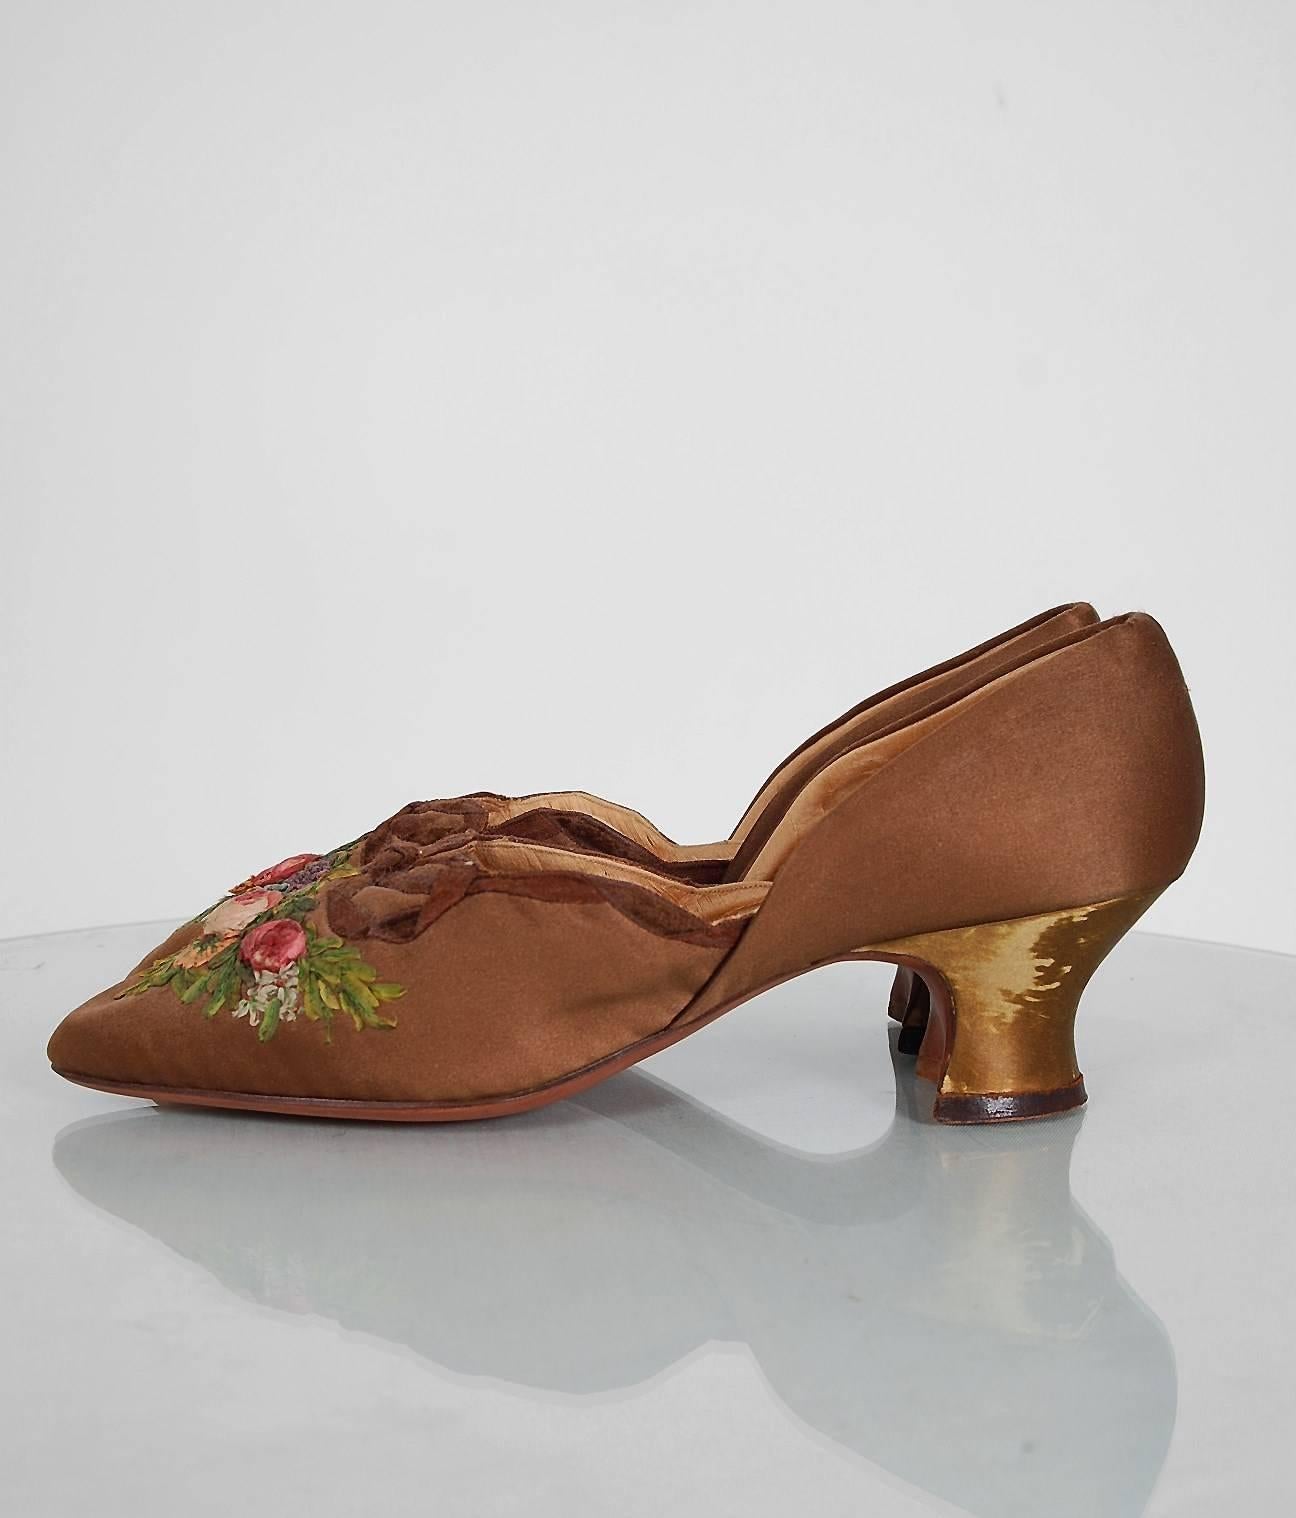 couture 1910 shoes